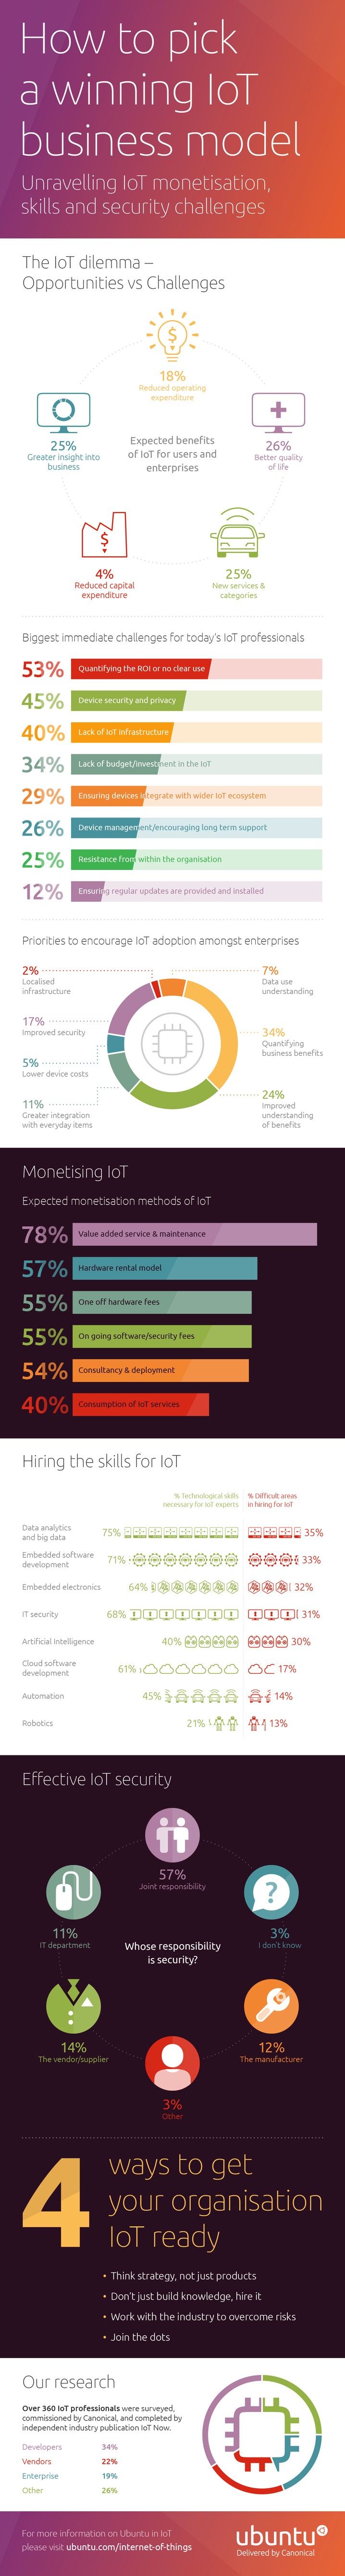 Canonical_IoT-Business-Models_infographic